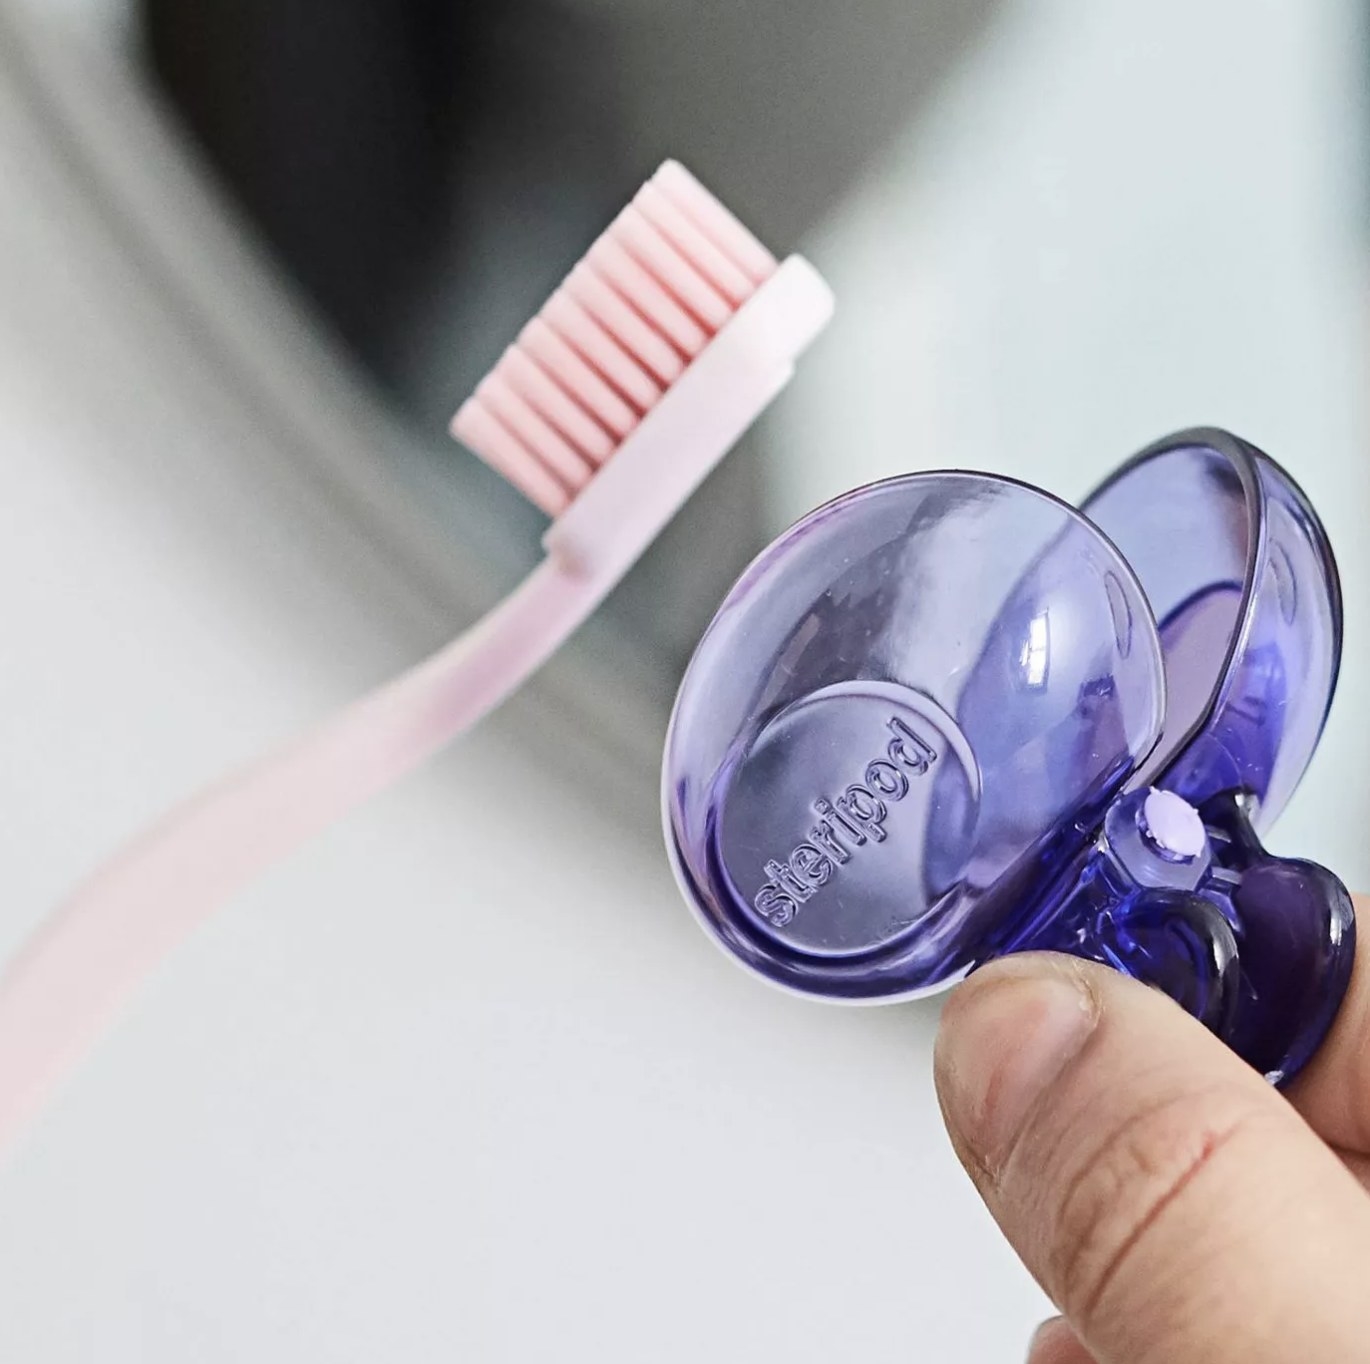 Steripod cover being placed on toothbrush 